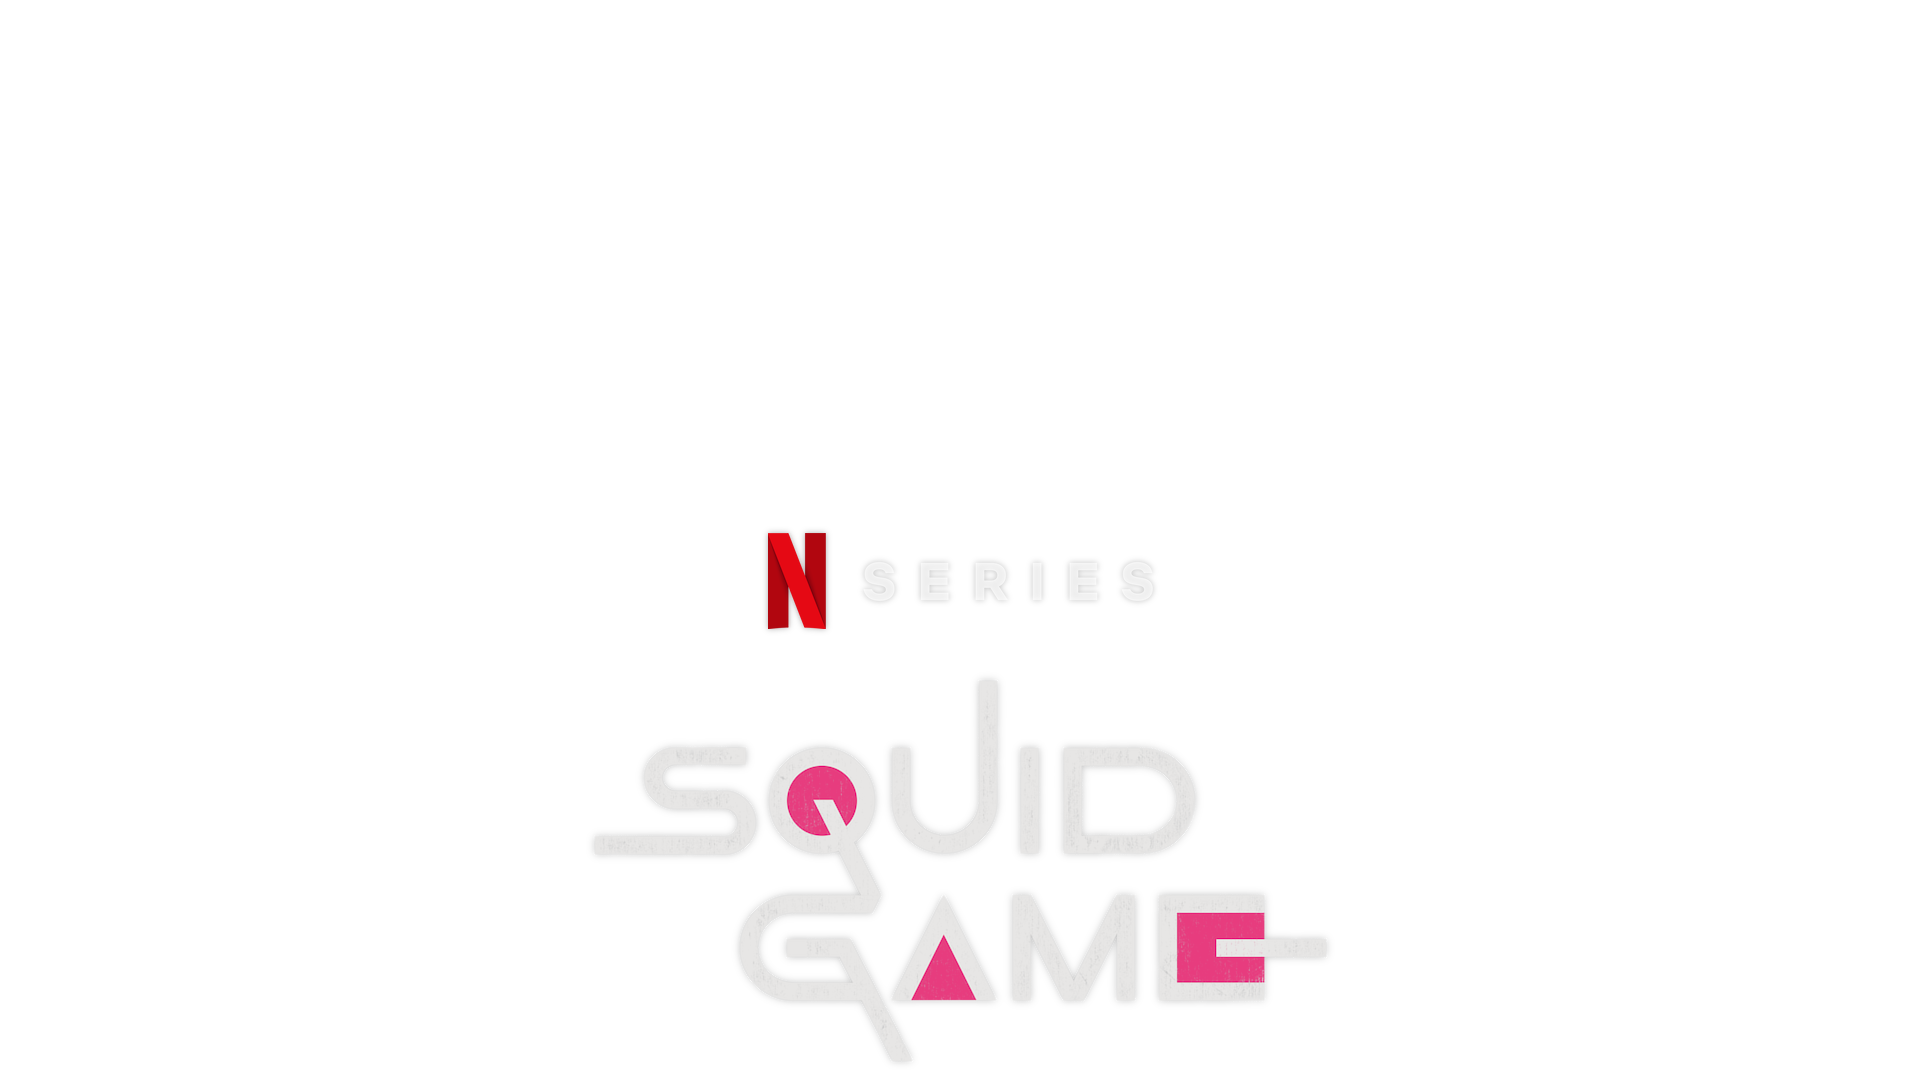 This is what the cast of Squid Game on Netflix are all like in